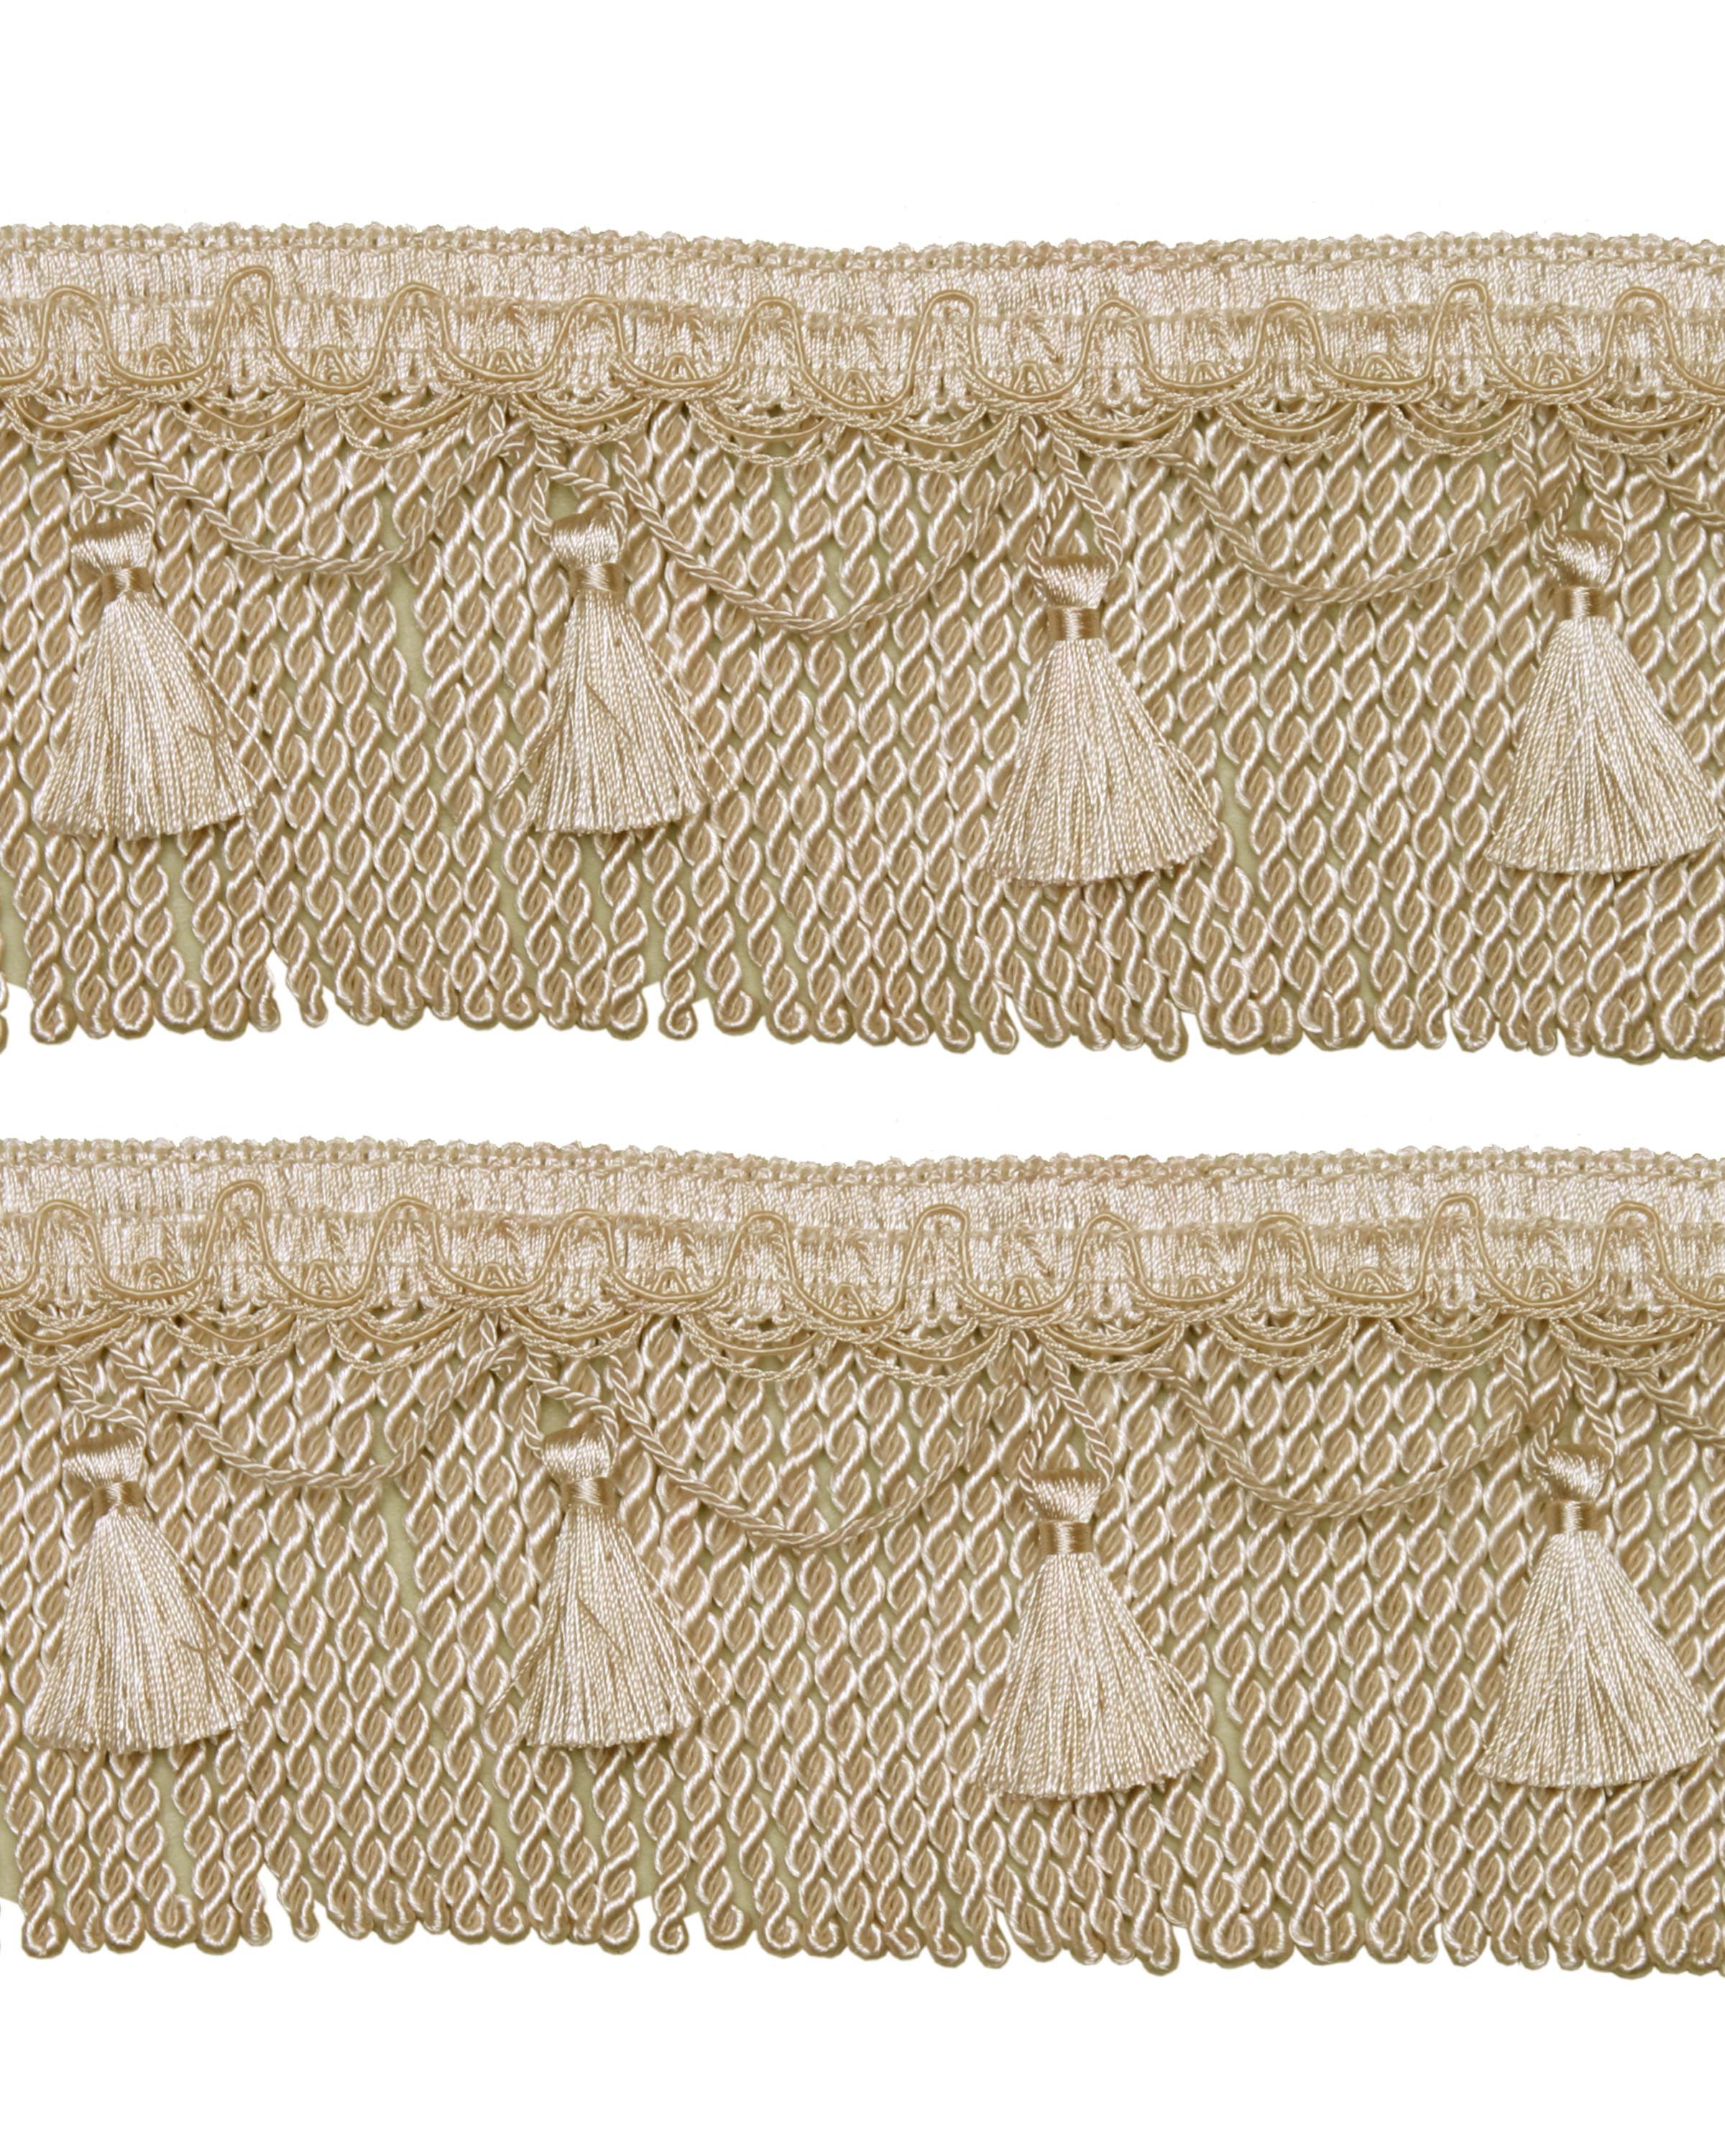 Bullion Cord Fringe on Braid with Scalloped Tassel - Creamy Gold 105mm Price is for 5 metres